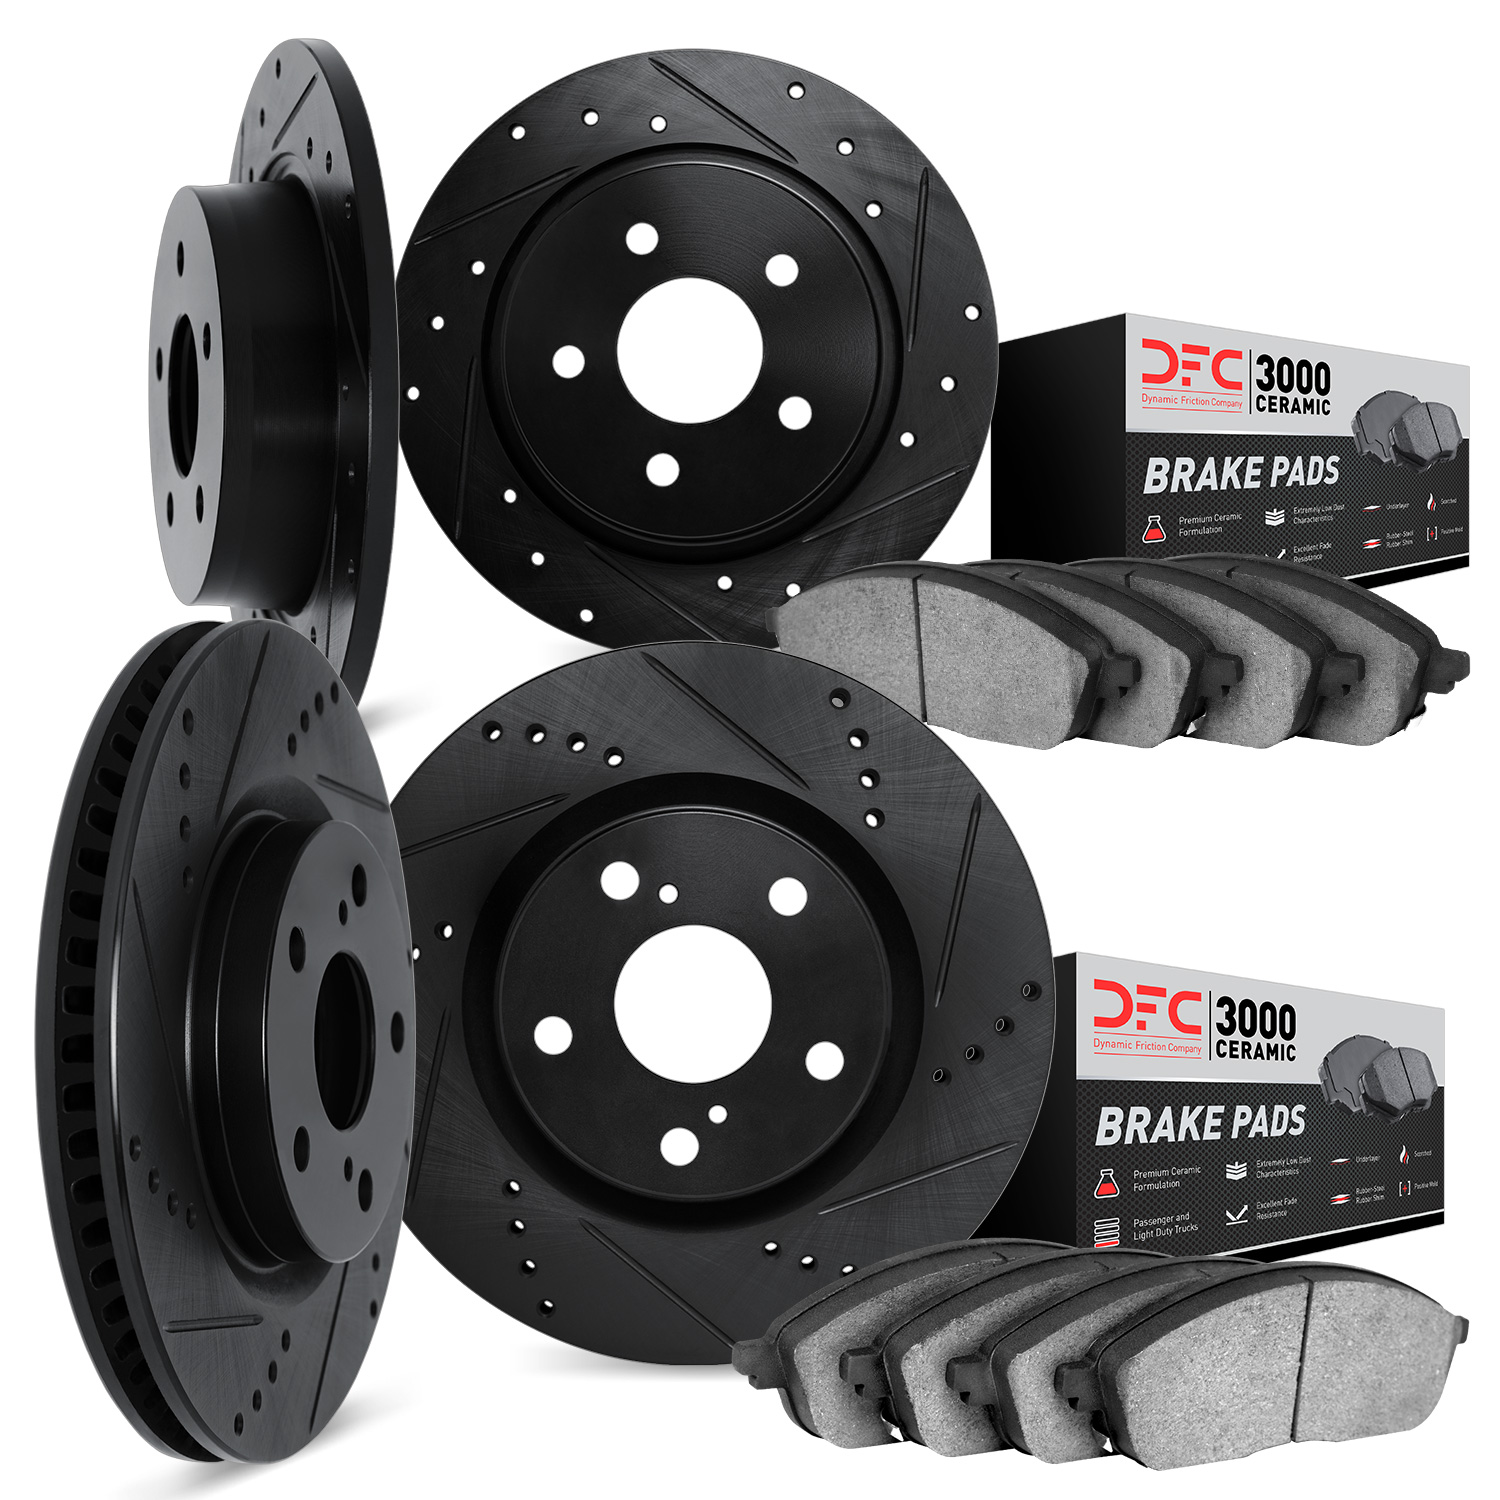 8304-41001 Drilled/Slotted Brake Rotors with 3000-Series Ceramic Brake Pads Kit [Black], 1998-1998 Mopar, Position: Front and Re